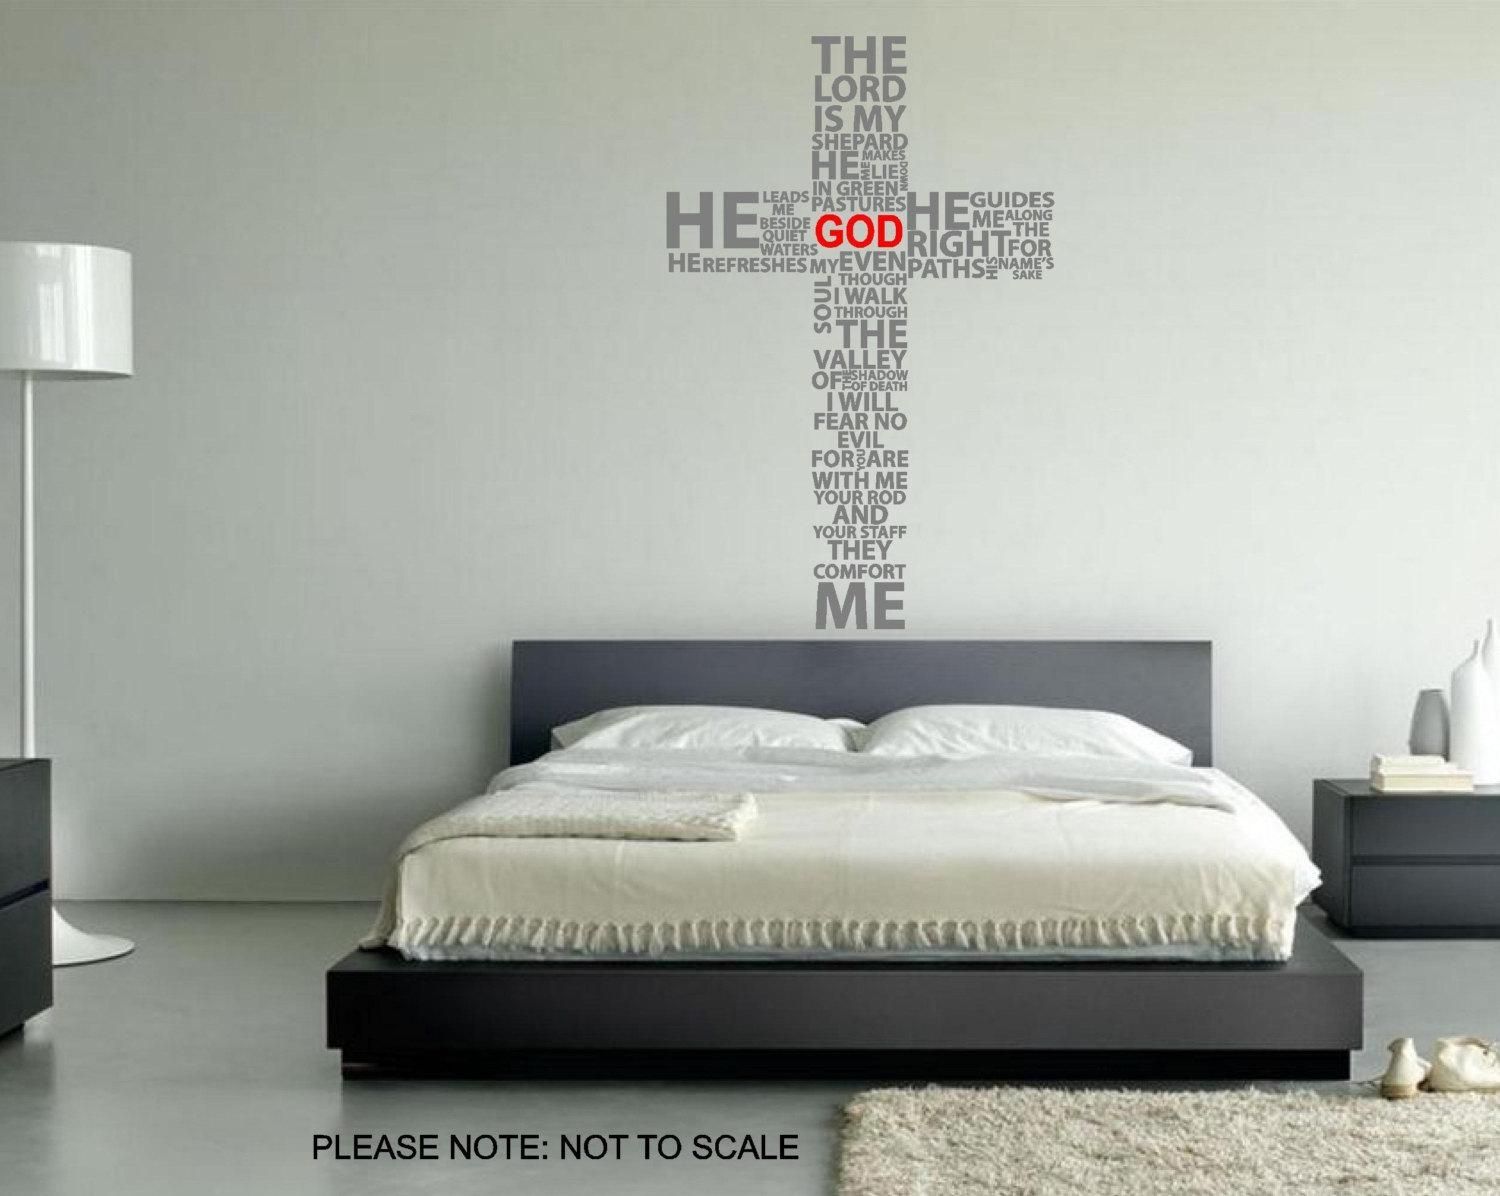 Large Typography Christian Cross Pray Wall Decal Wall Pertaining To Large Christian Wall Art (View 2 of 20)